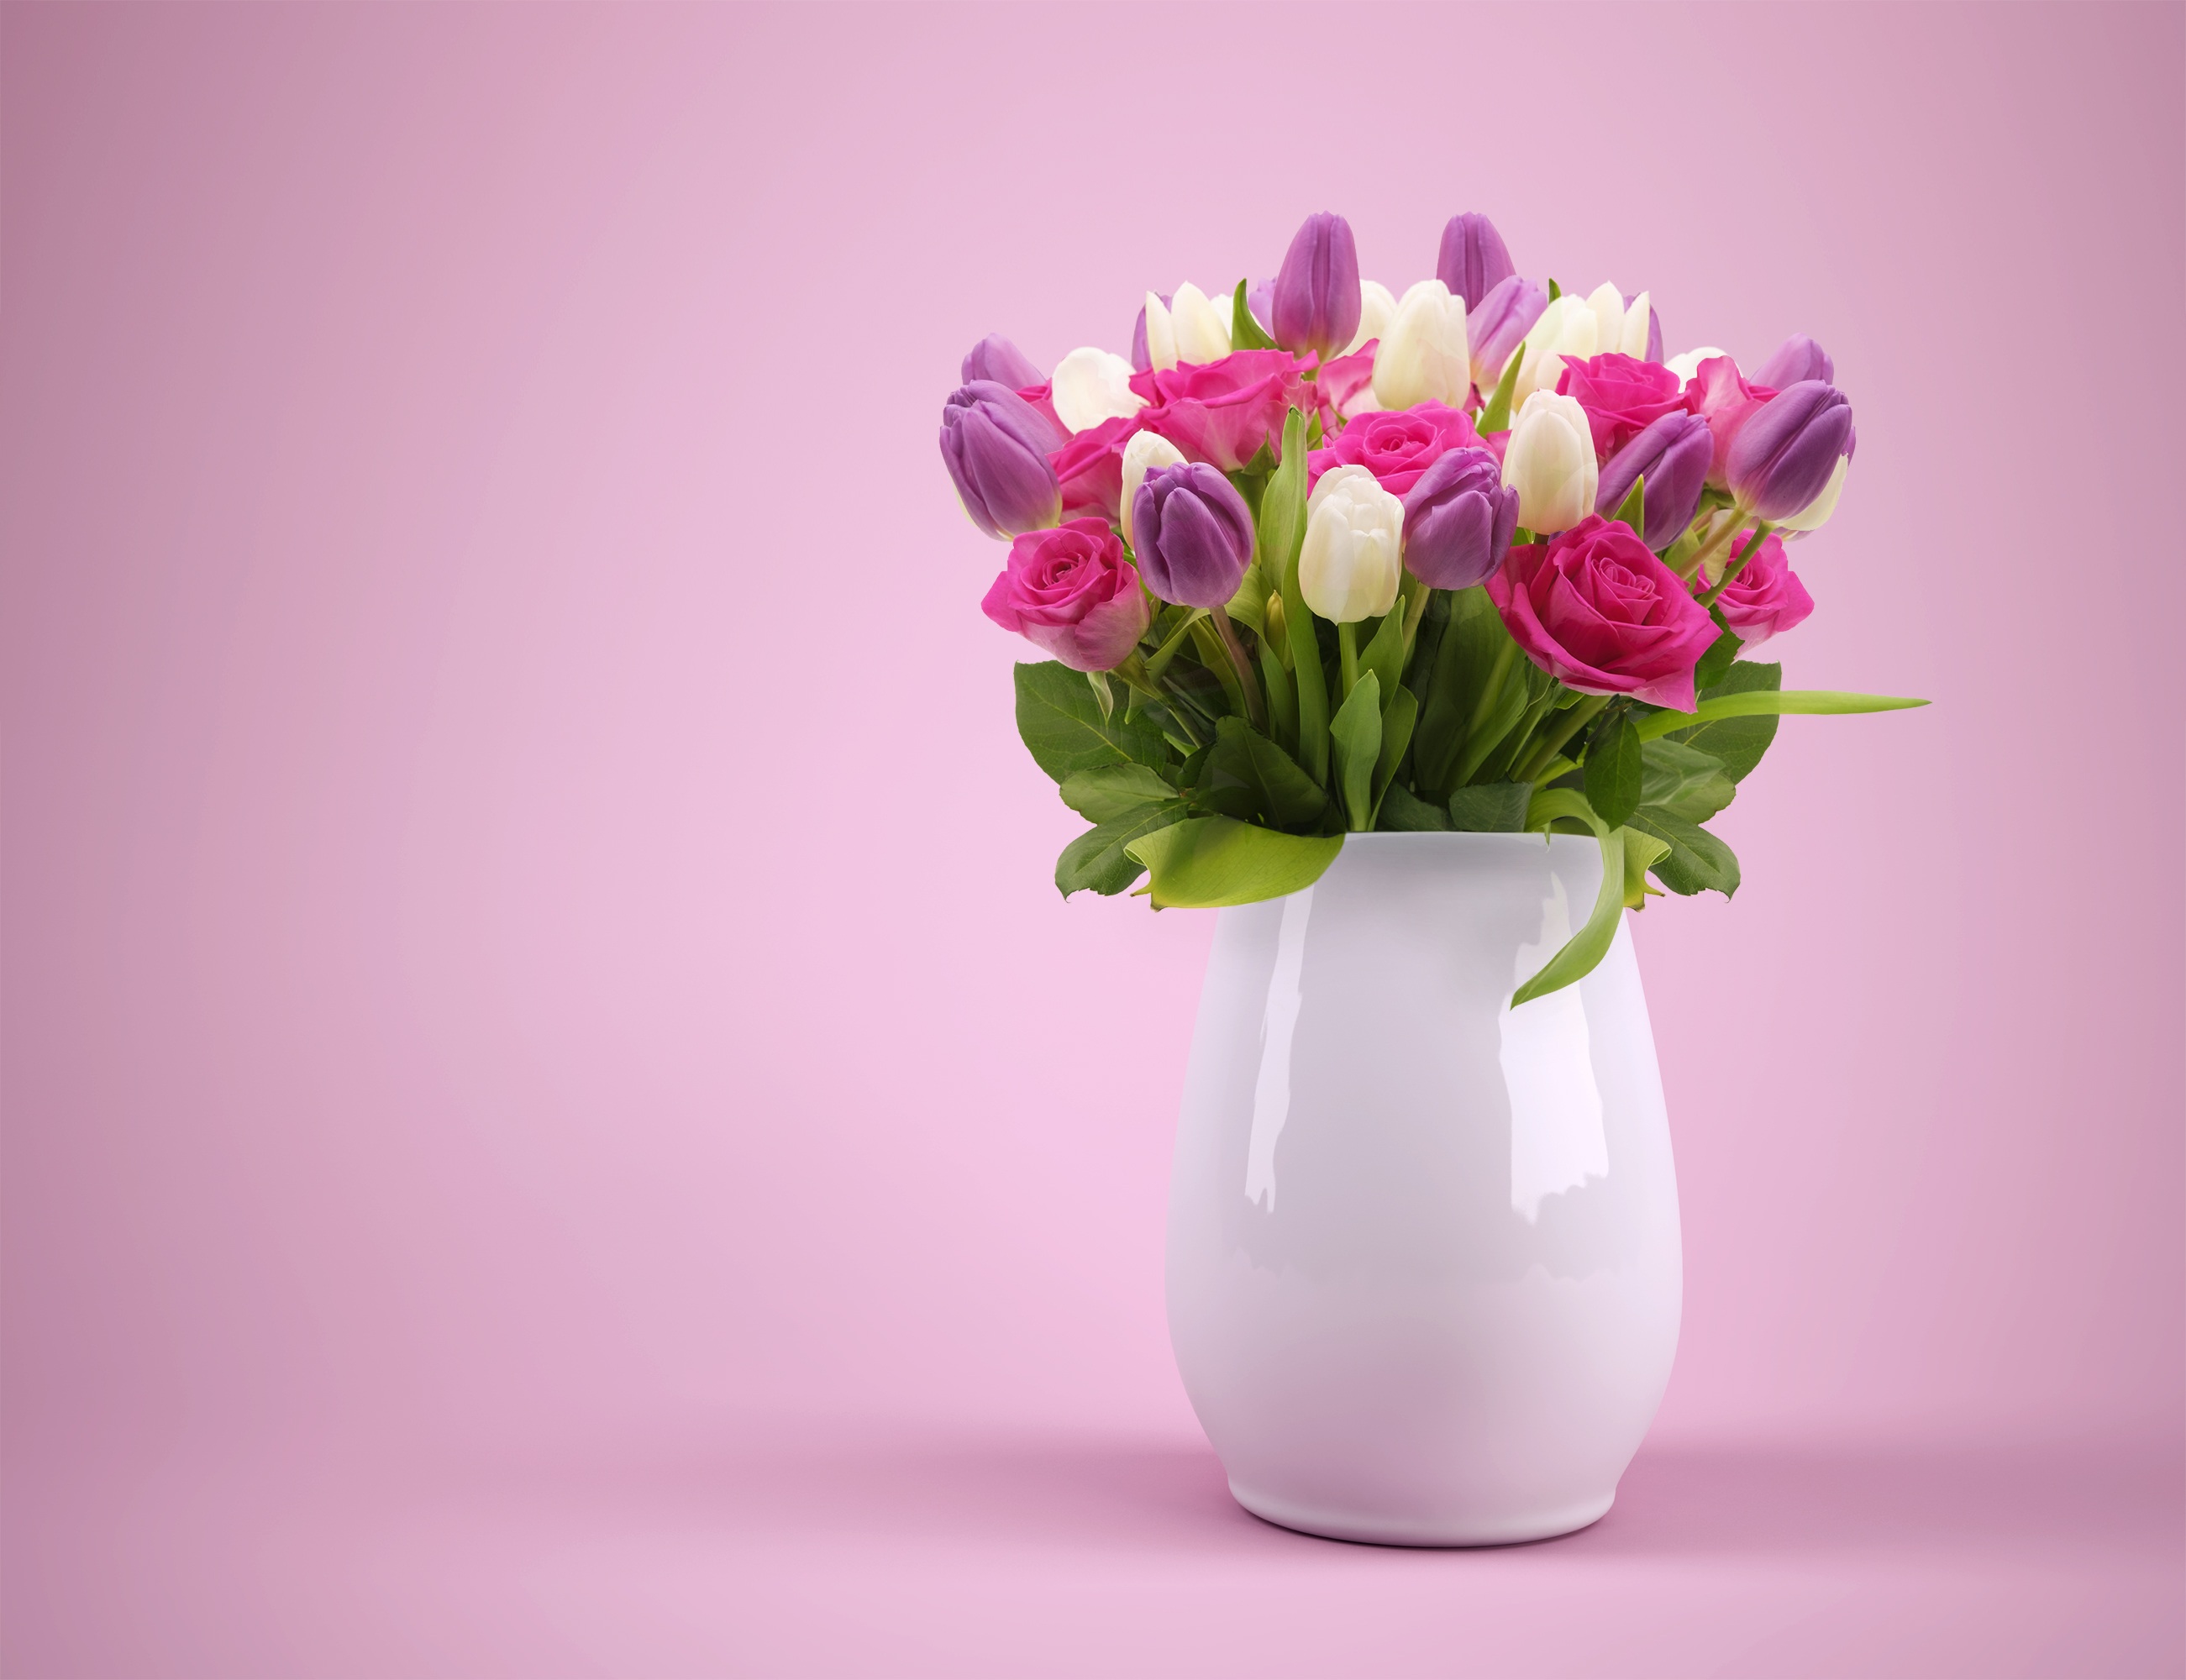 Bunch of Flowers in a Vase by Yuri_B